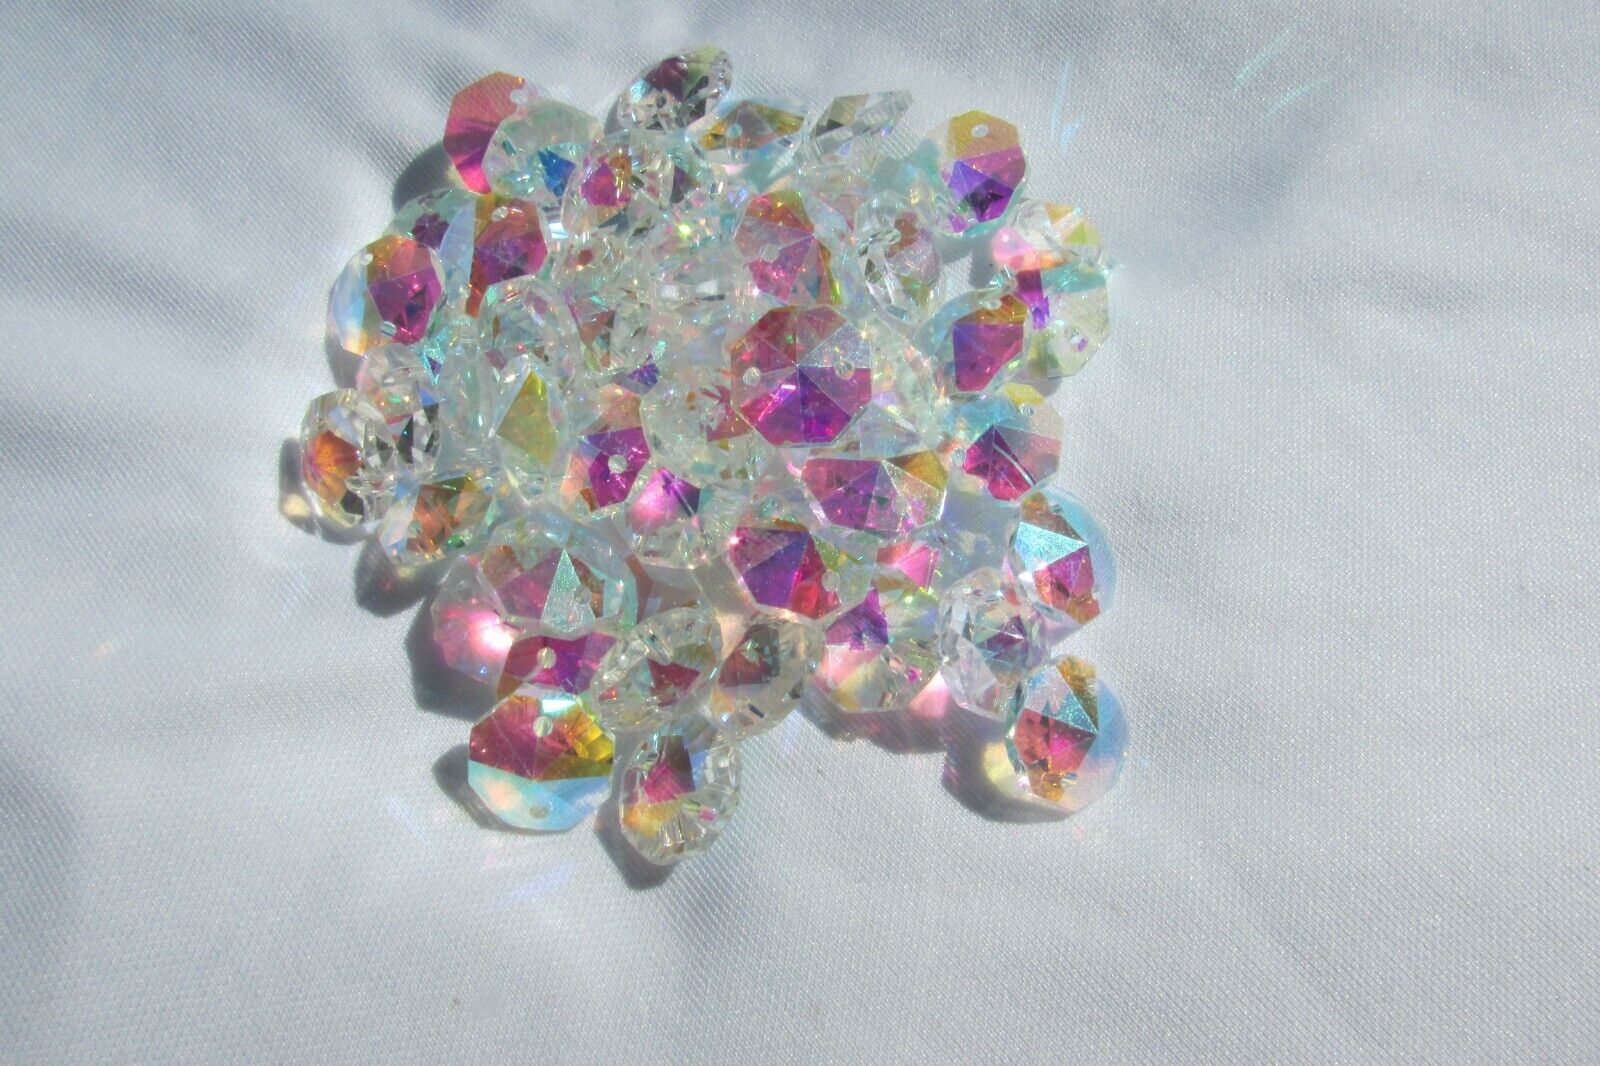  200- 14MM AB color AAA 2 HOLE OCTAGON CRYSTAL GLASS BEADS CHANDELIER